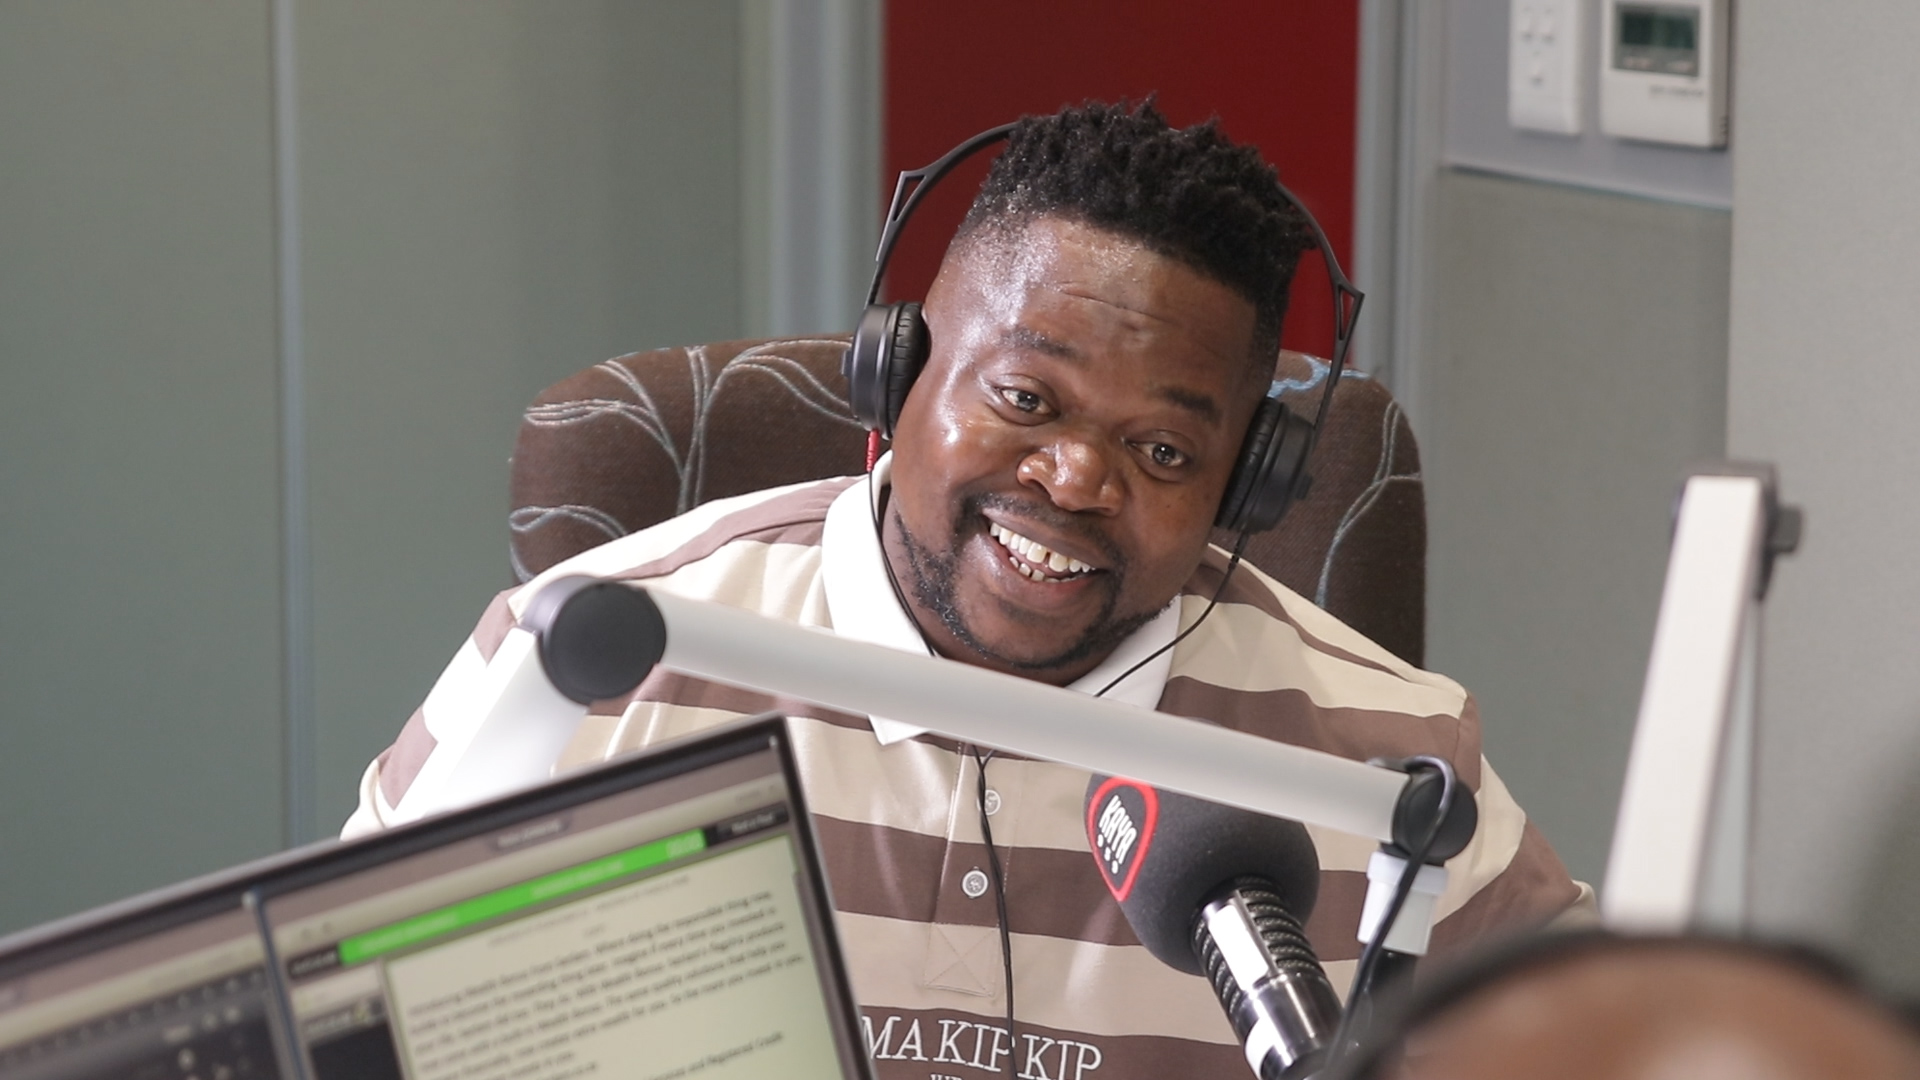 “Sex before marriage is a scene” Mashabela Galane talks about his one-man show on My top 10 at 10 with T Bose